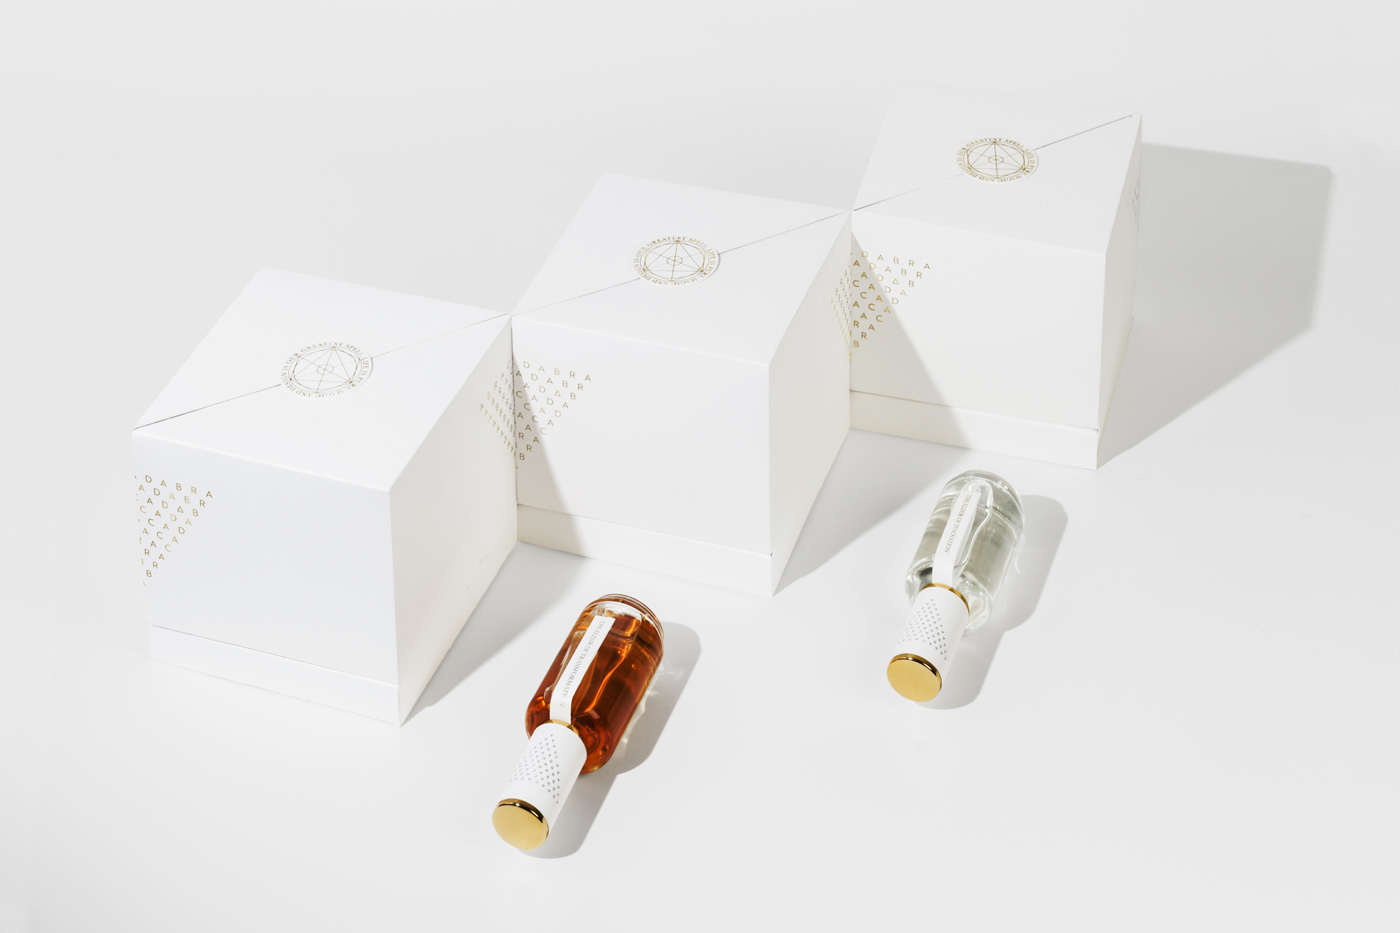 Spanish Perfumes Packaging Design Provides Unique Seasonal Gifting Experience